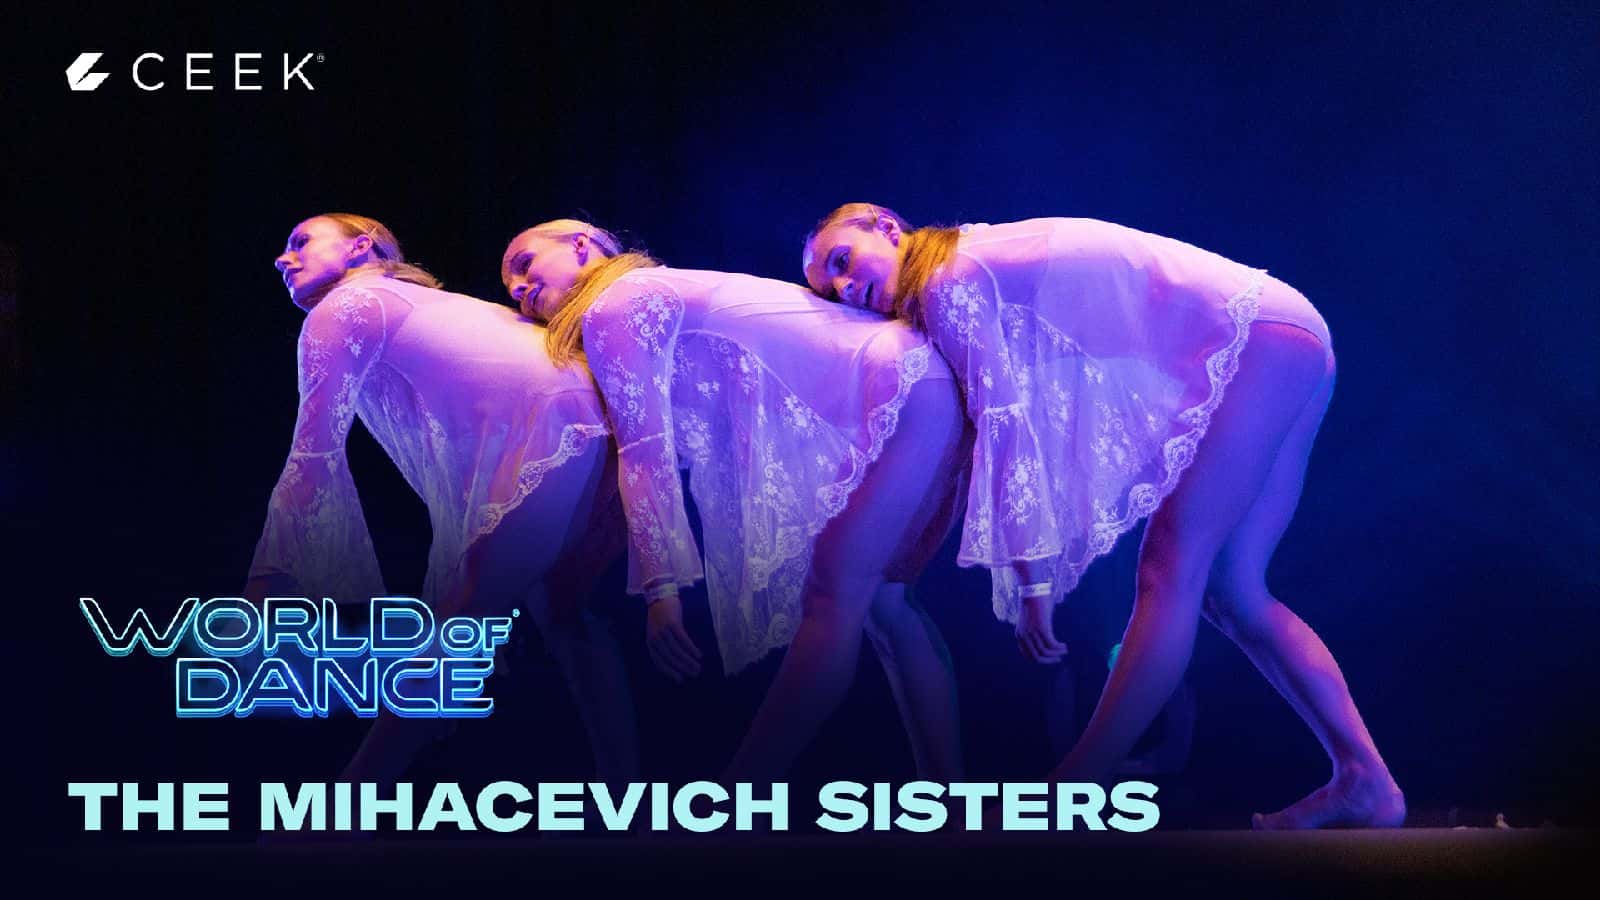 The Mihacevich Sisters